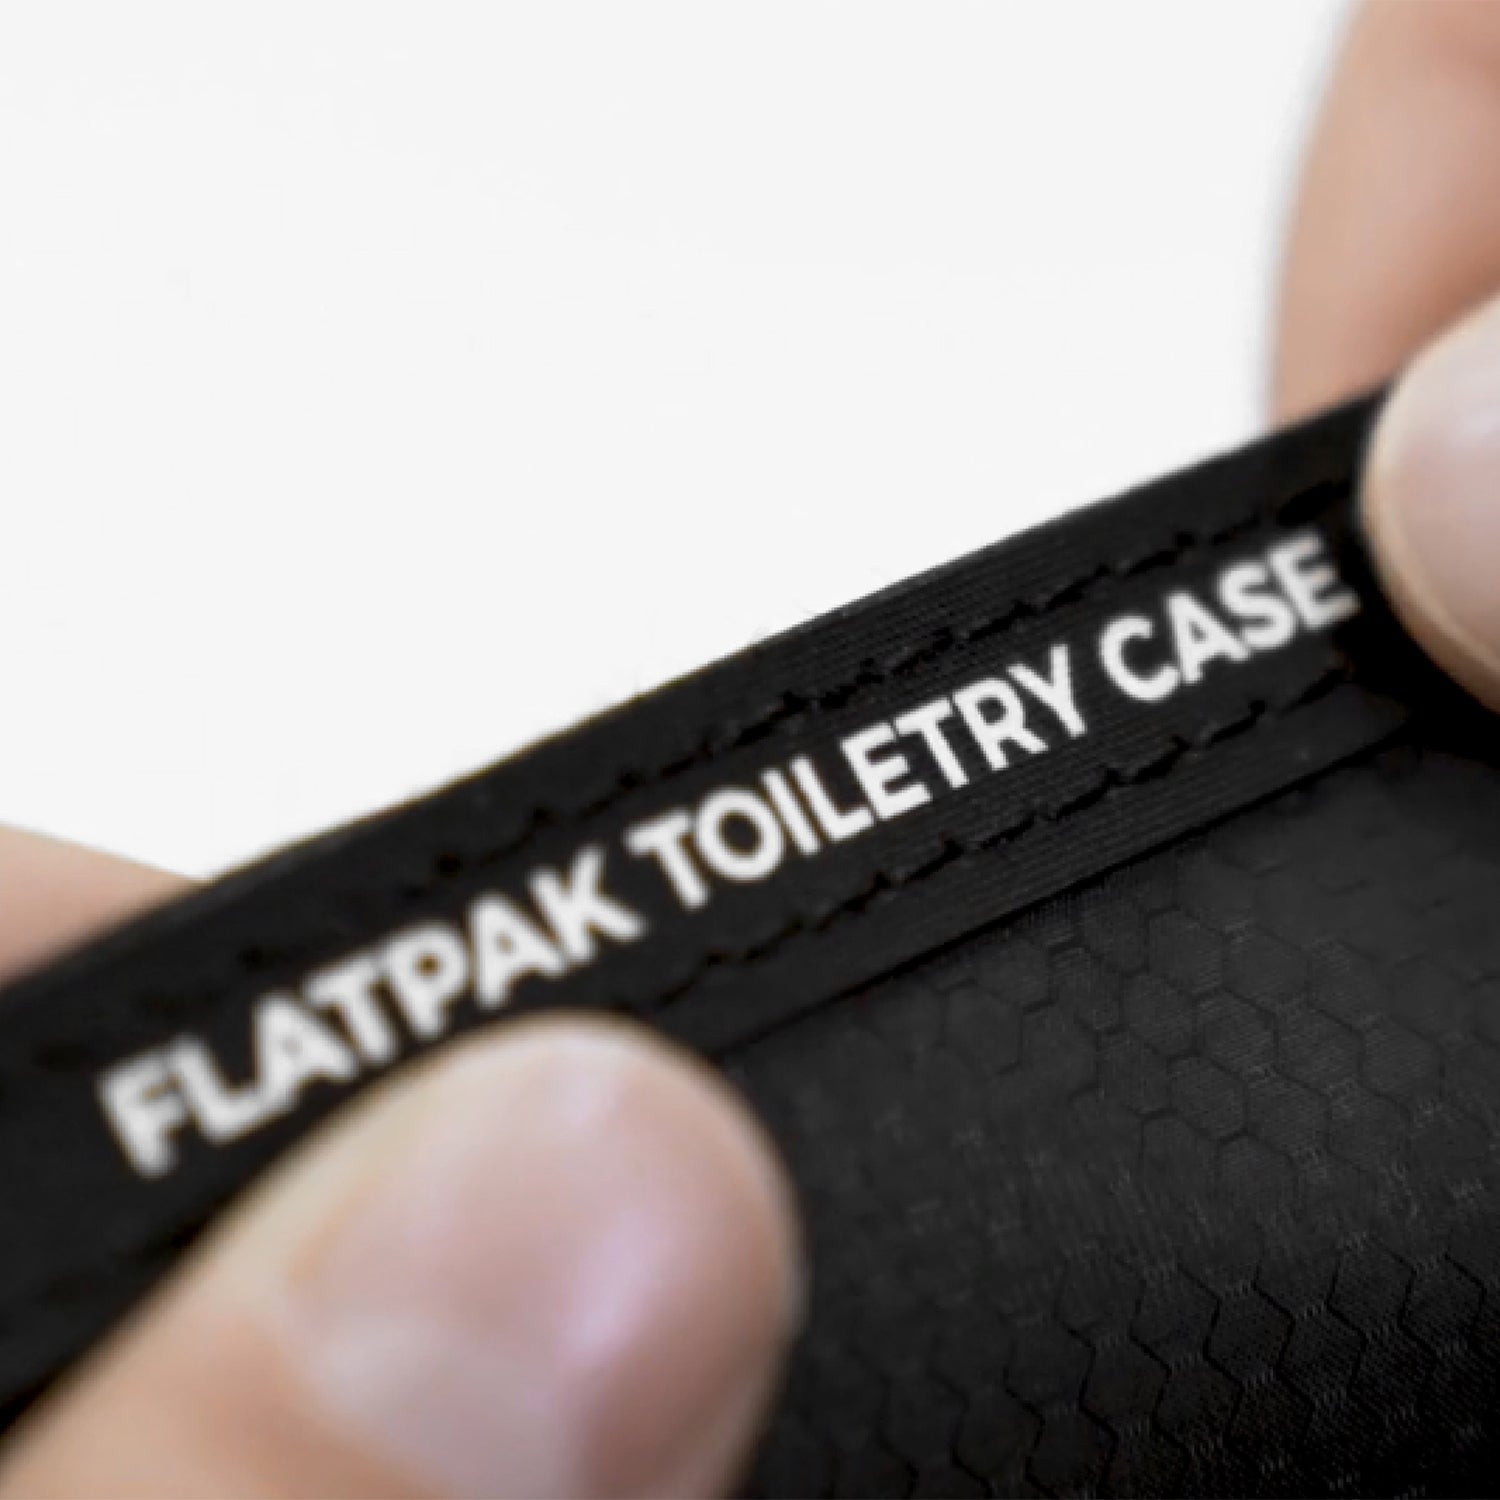 Close up view of the words "FlatPak Toiletry Case" on a seam